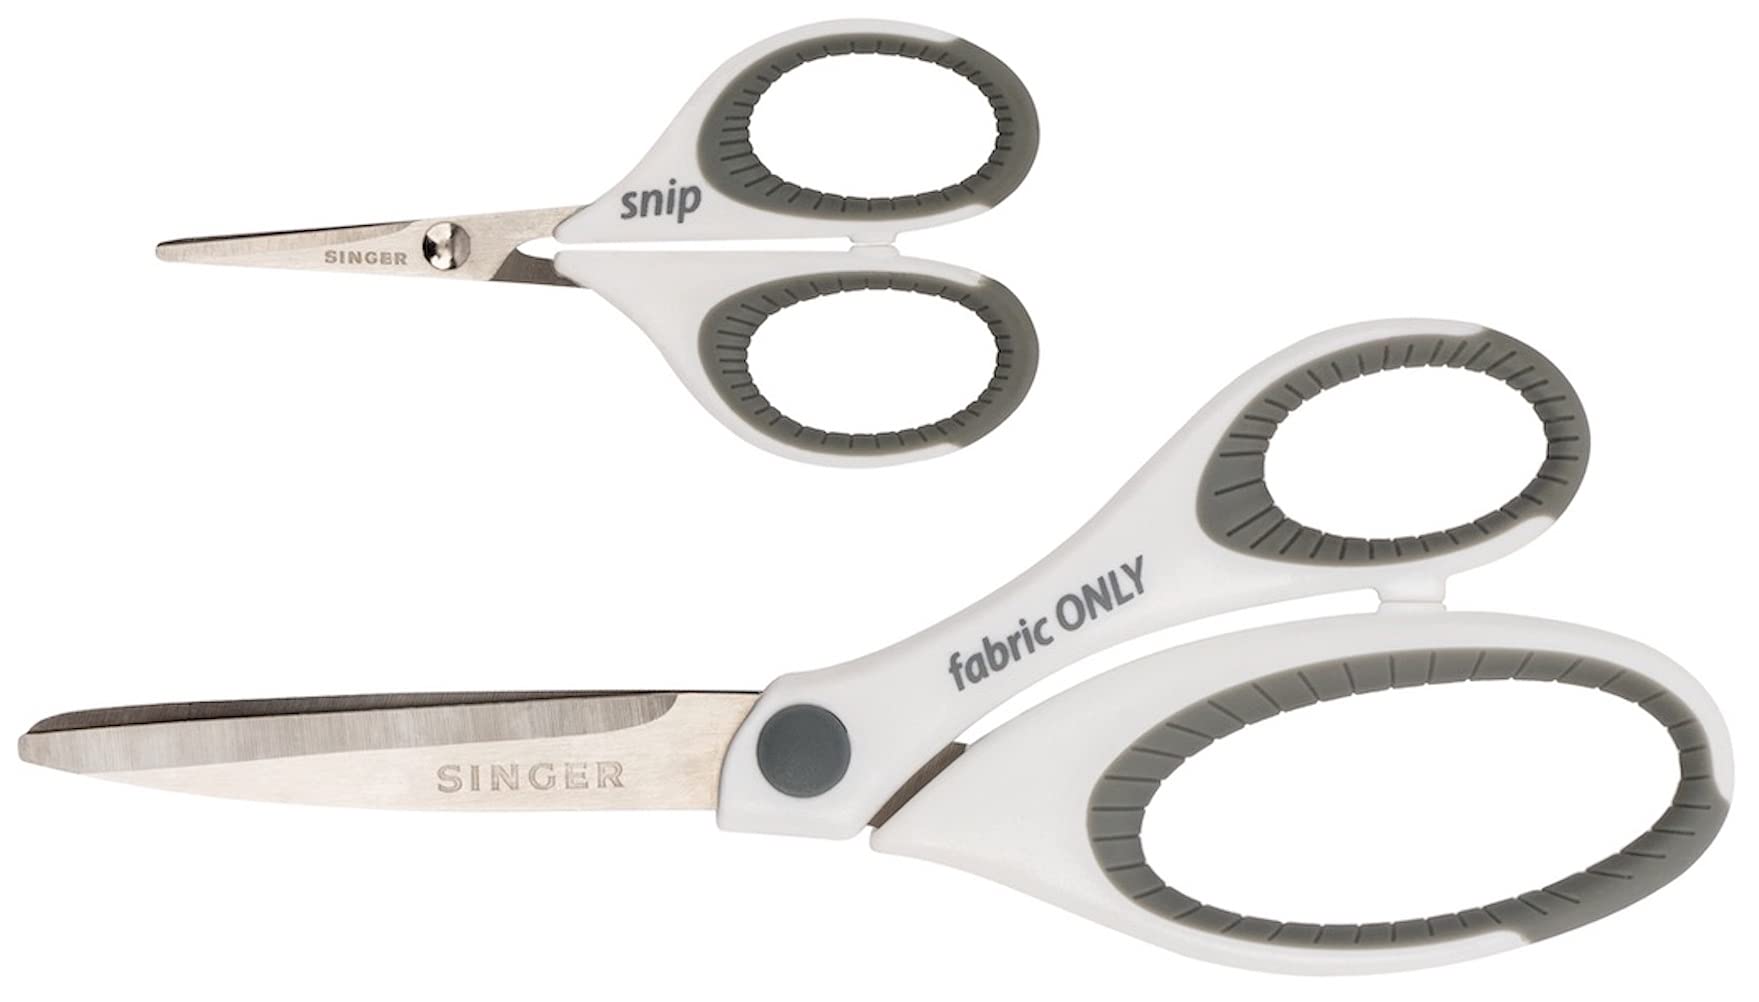 SINGER 07175 Sewing and Detail Scissors Set with Comfort Grip,White,pink